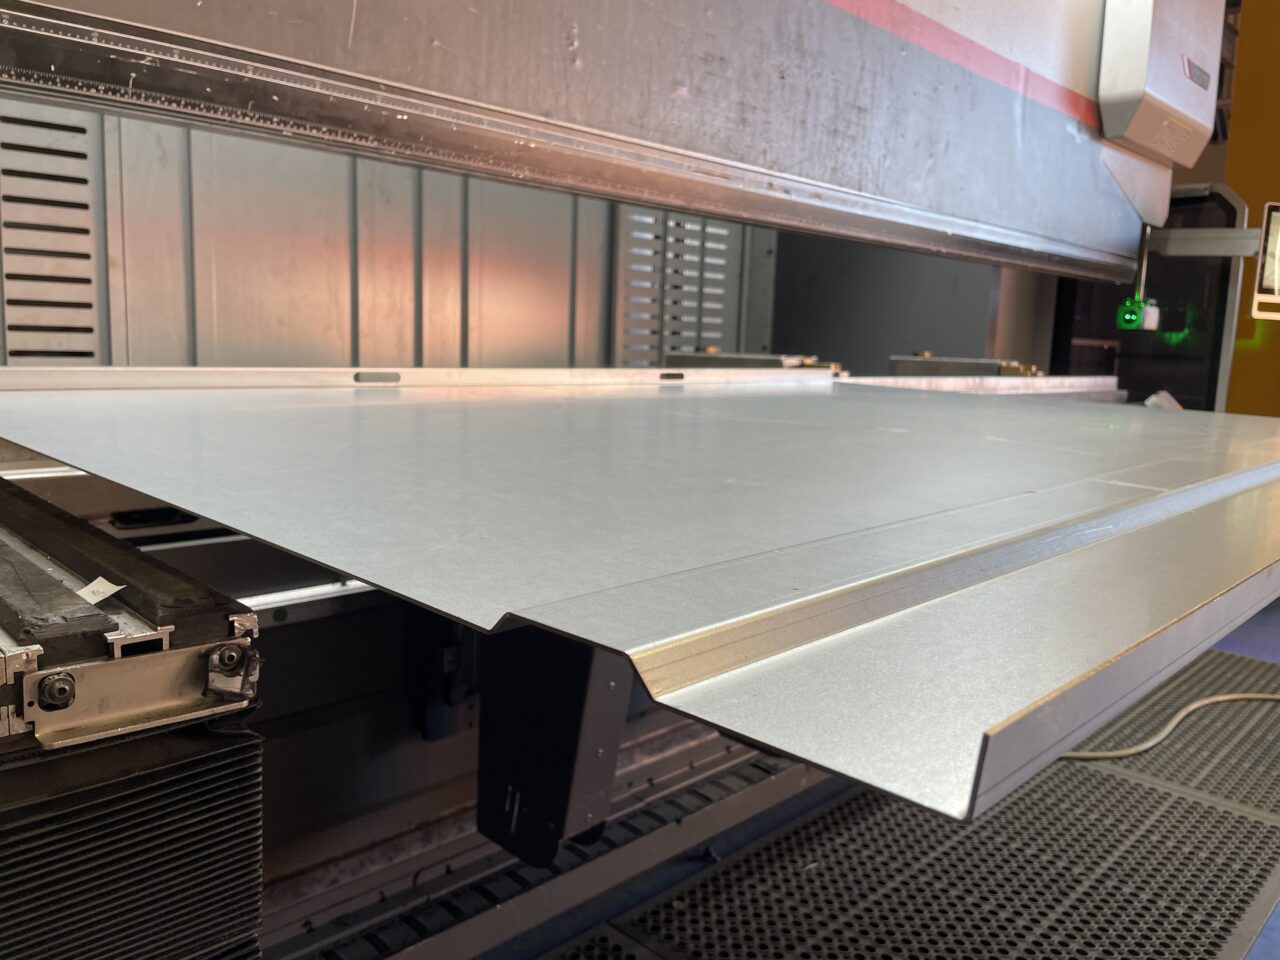 Increasing Sheet Metal Bending Capacity With Our New Machine Investment - Charles Day Steels